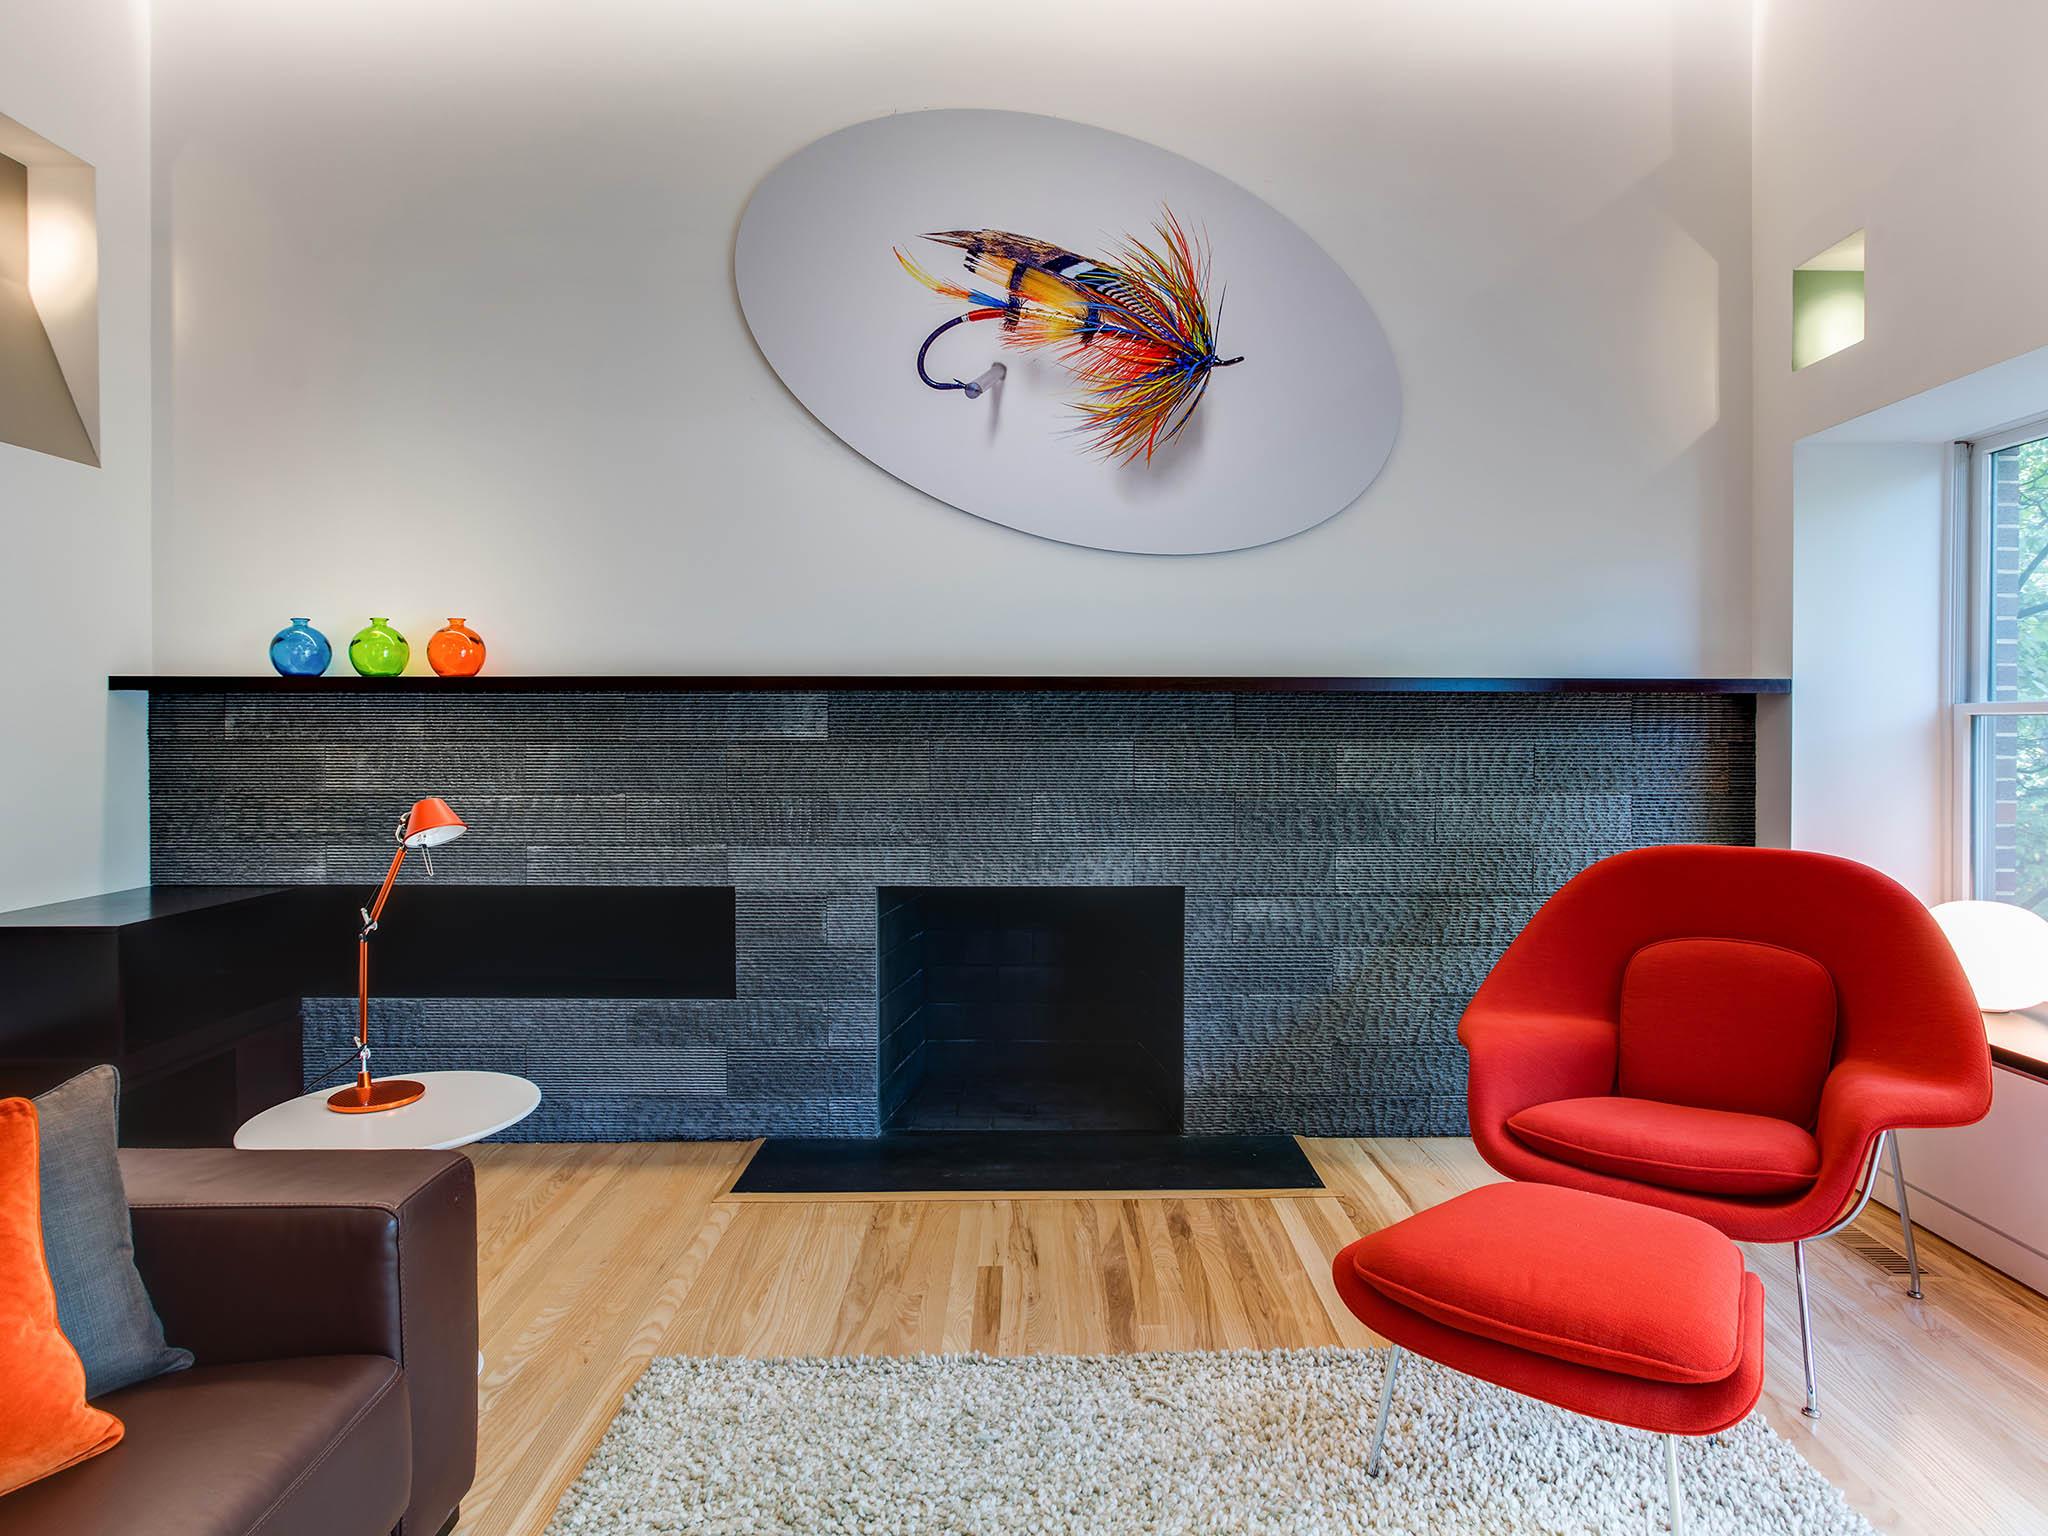 Janet Berls' Washington, DC, living room is designed for reading and hosting book clubs. It has a Saarinen 'womb chair' and lots of light